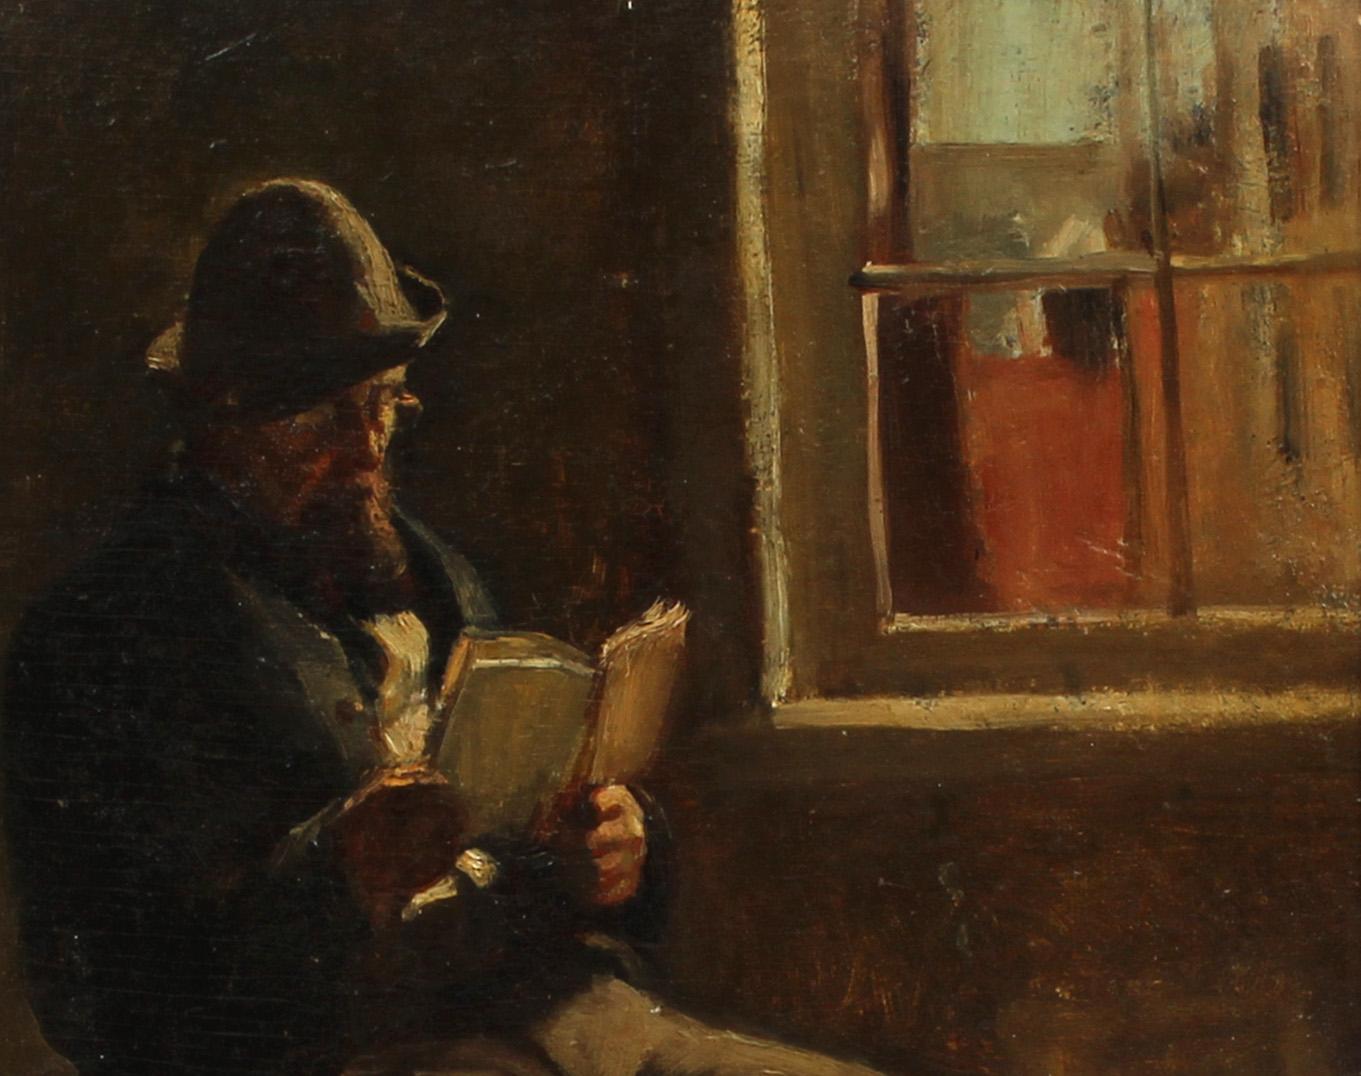 A gorgeous early 20th Century ashcan school painting depicting a man in period clothes reading by the light of a window.  Just outside the light dappled room and scene an intriguing cityscape.

The painting is in excellent original condition and